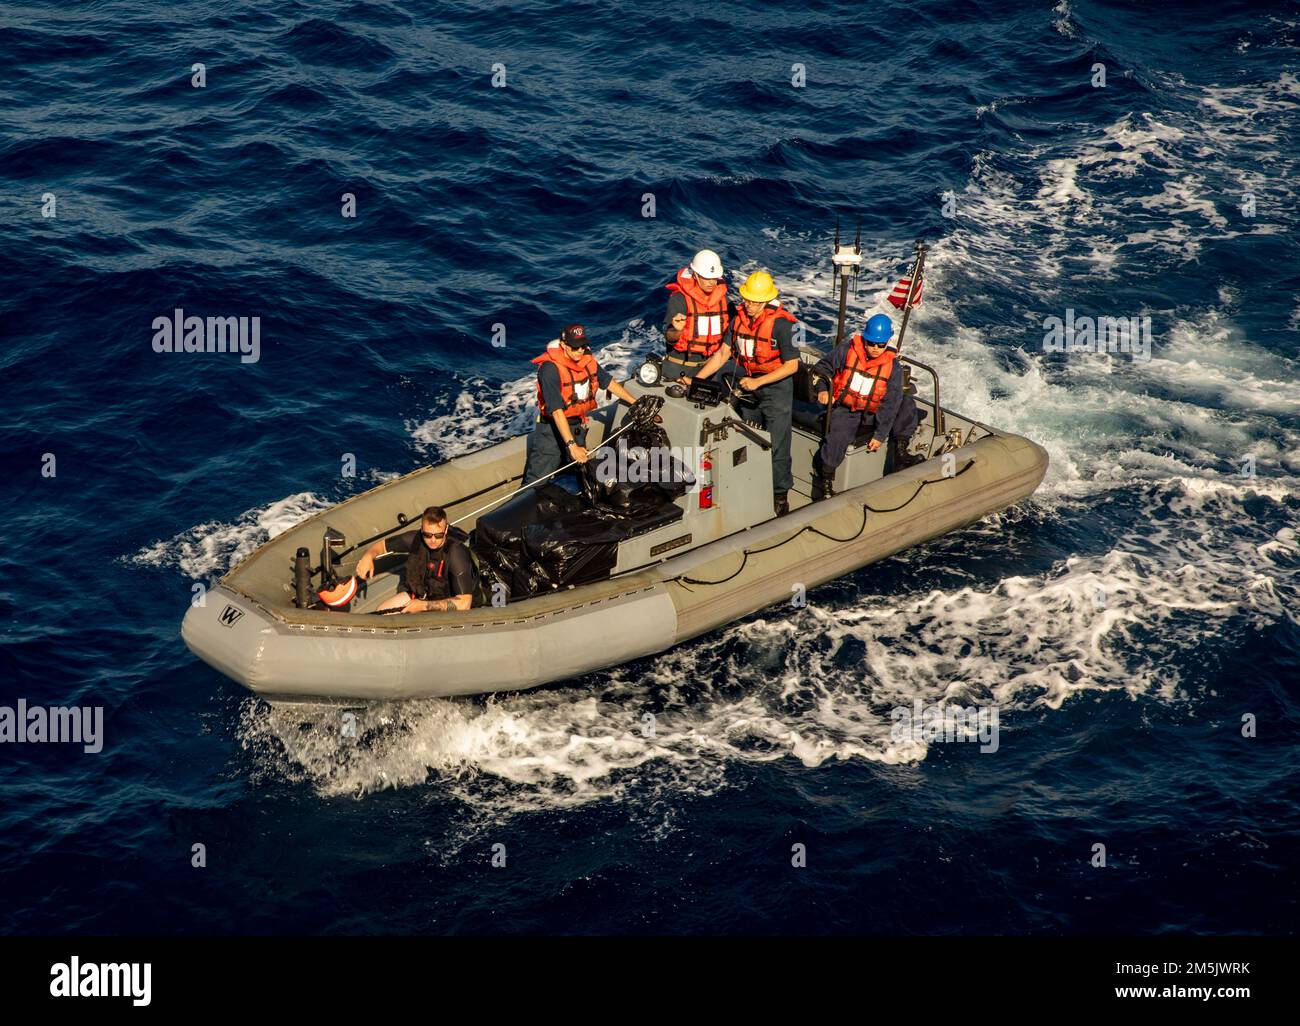 SOUTH CHINA SEA (March 12, 2022) Sailors aboard a Rigid-hull Inflatable Boat (RHIB)return to Arleigh Burke-class guided-missile destroyer USS Ralph Johnson (DDG 114). Ralph Johnson is assigned to Task Force 71/Destroyer Squadron (DESRON) 15, the Navy’s largest forward-deployed DESRON and the U.S. 7th fleet’s principal surface force. Stock Photo